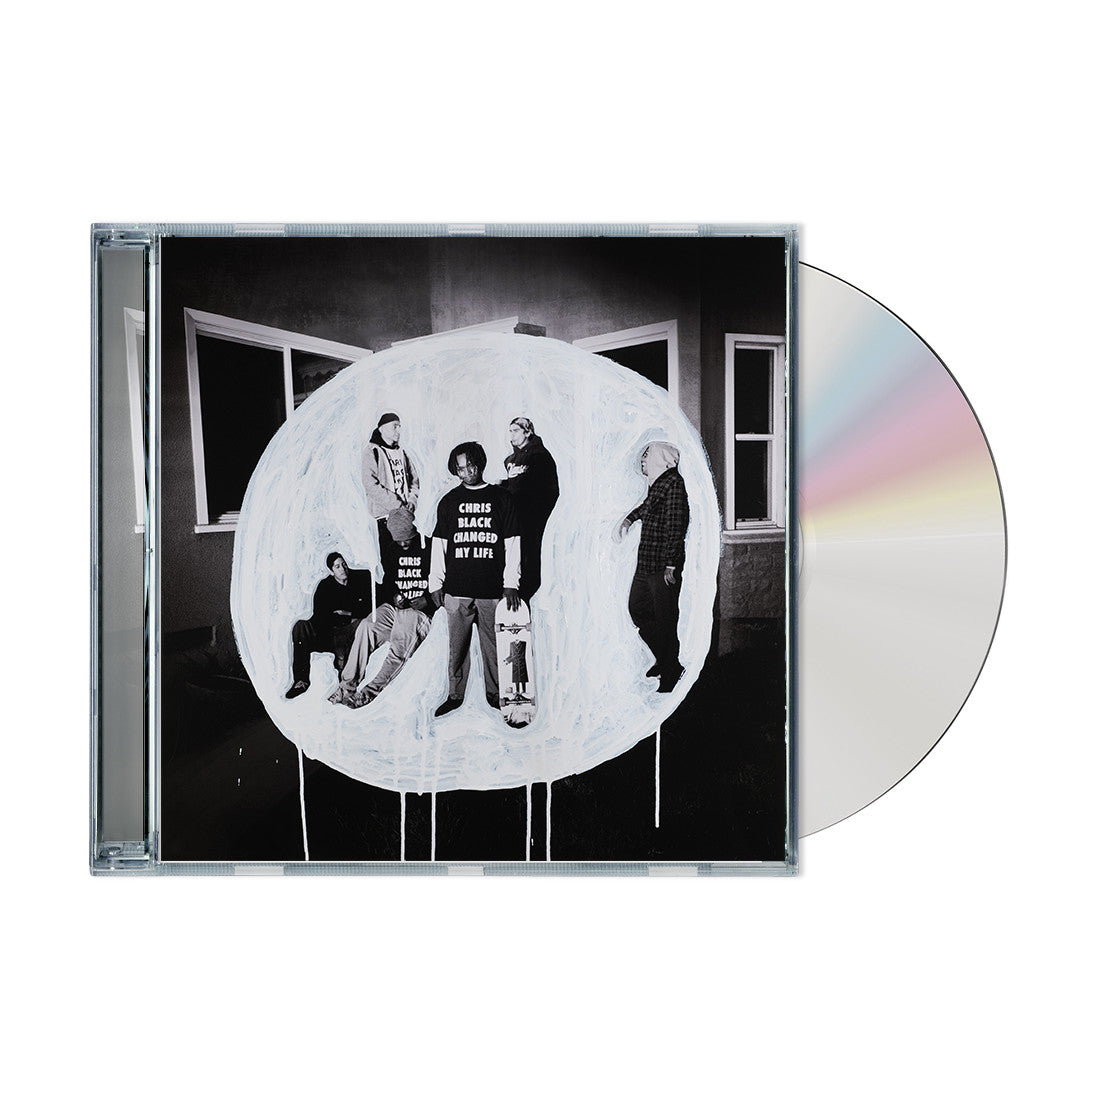 Portugal. The Man- Chris Black Changed My Life (PREORDER) - Darkside Records